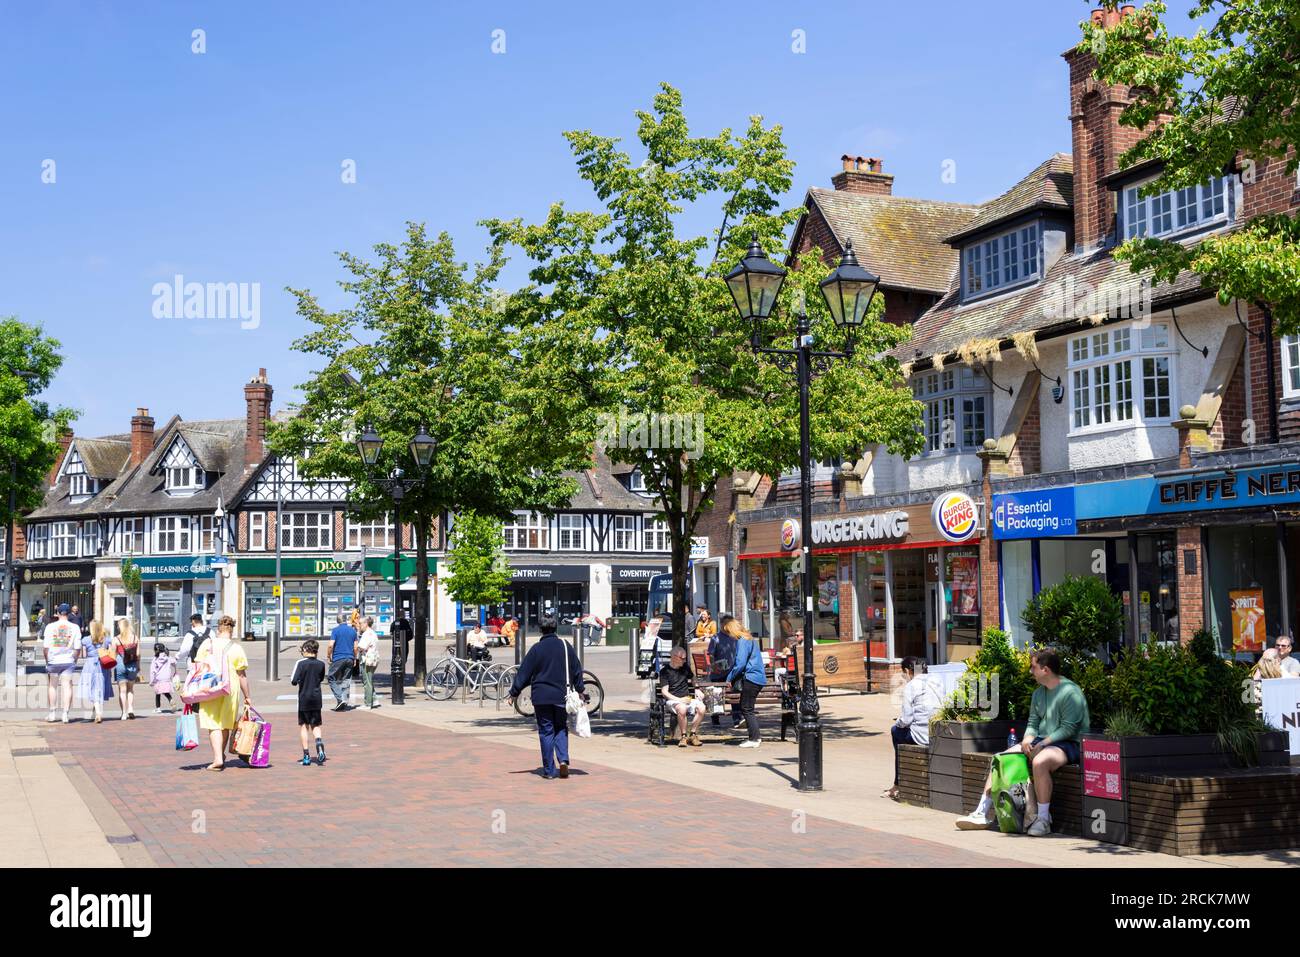 Solihull town centre shoppers shopping and shops on the high street in Solihull High street Solihull West Midlands England UK GB Europe Stock Photo